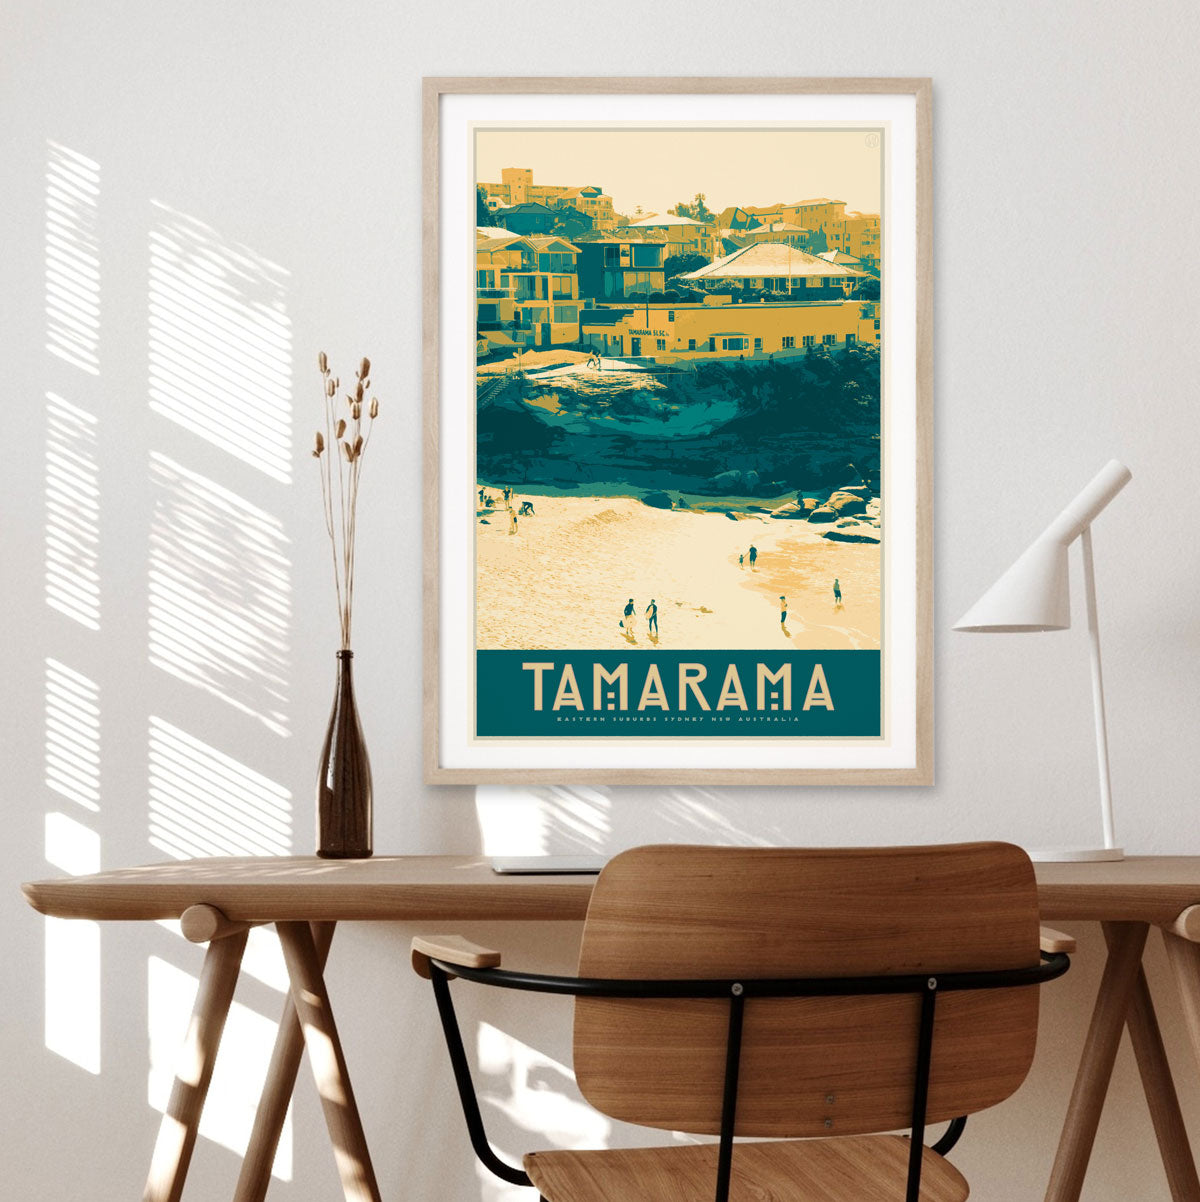 Tamarama Beach Sydney vintage retro poster from Places We Luv